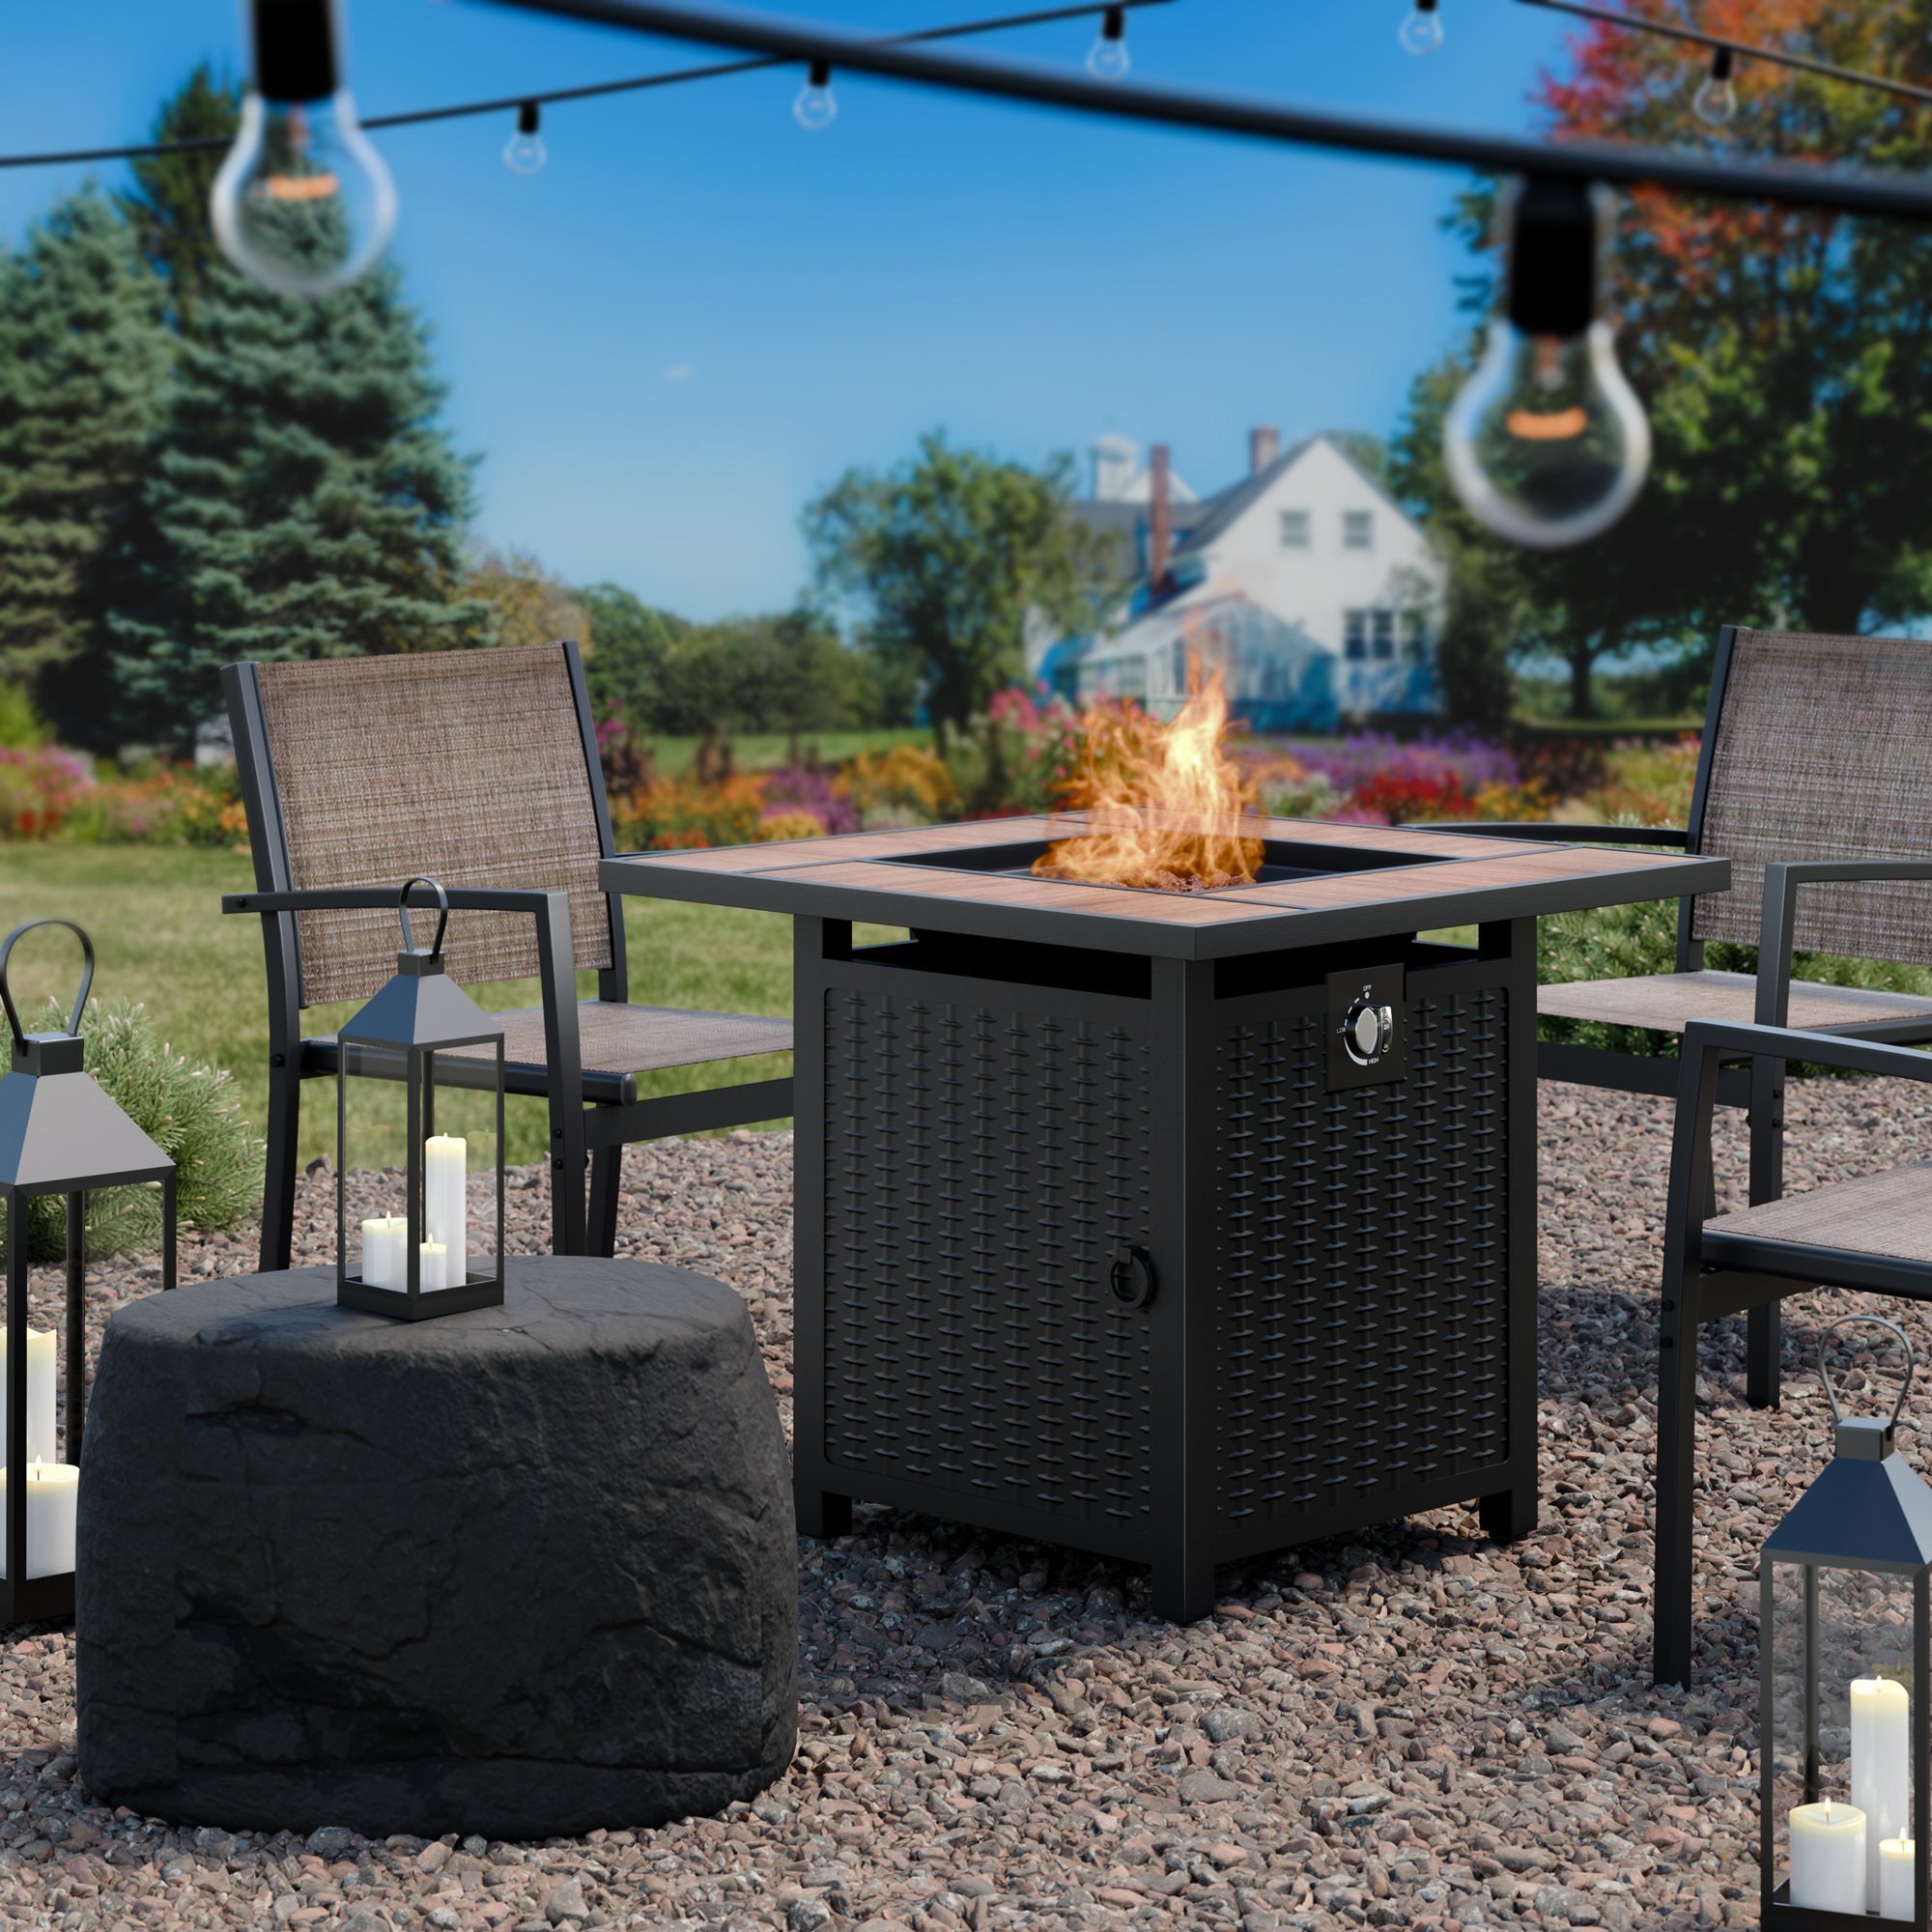 Walsunny 30" Propane Gas Fire Pit Table 50,000 BTU Square Outdoor Wicker Walnut Wood - image 4 of 9